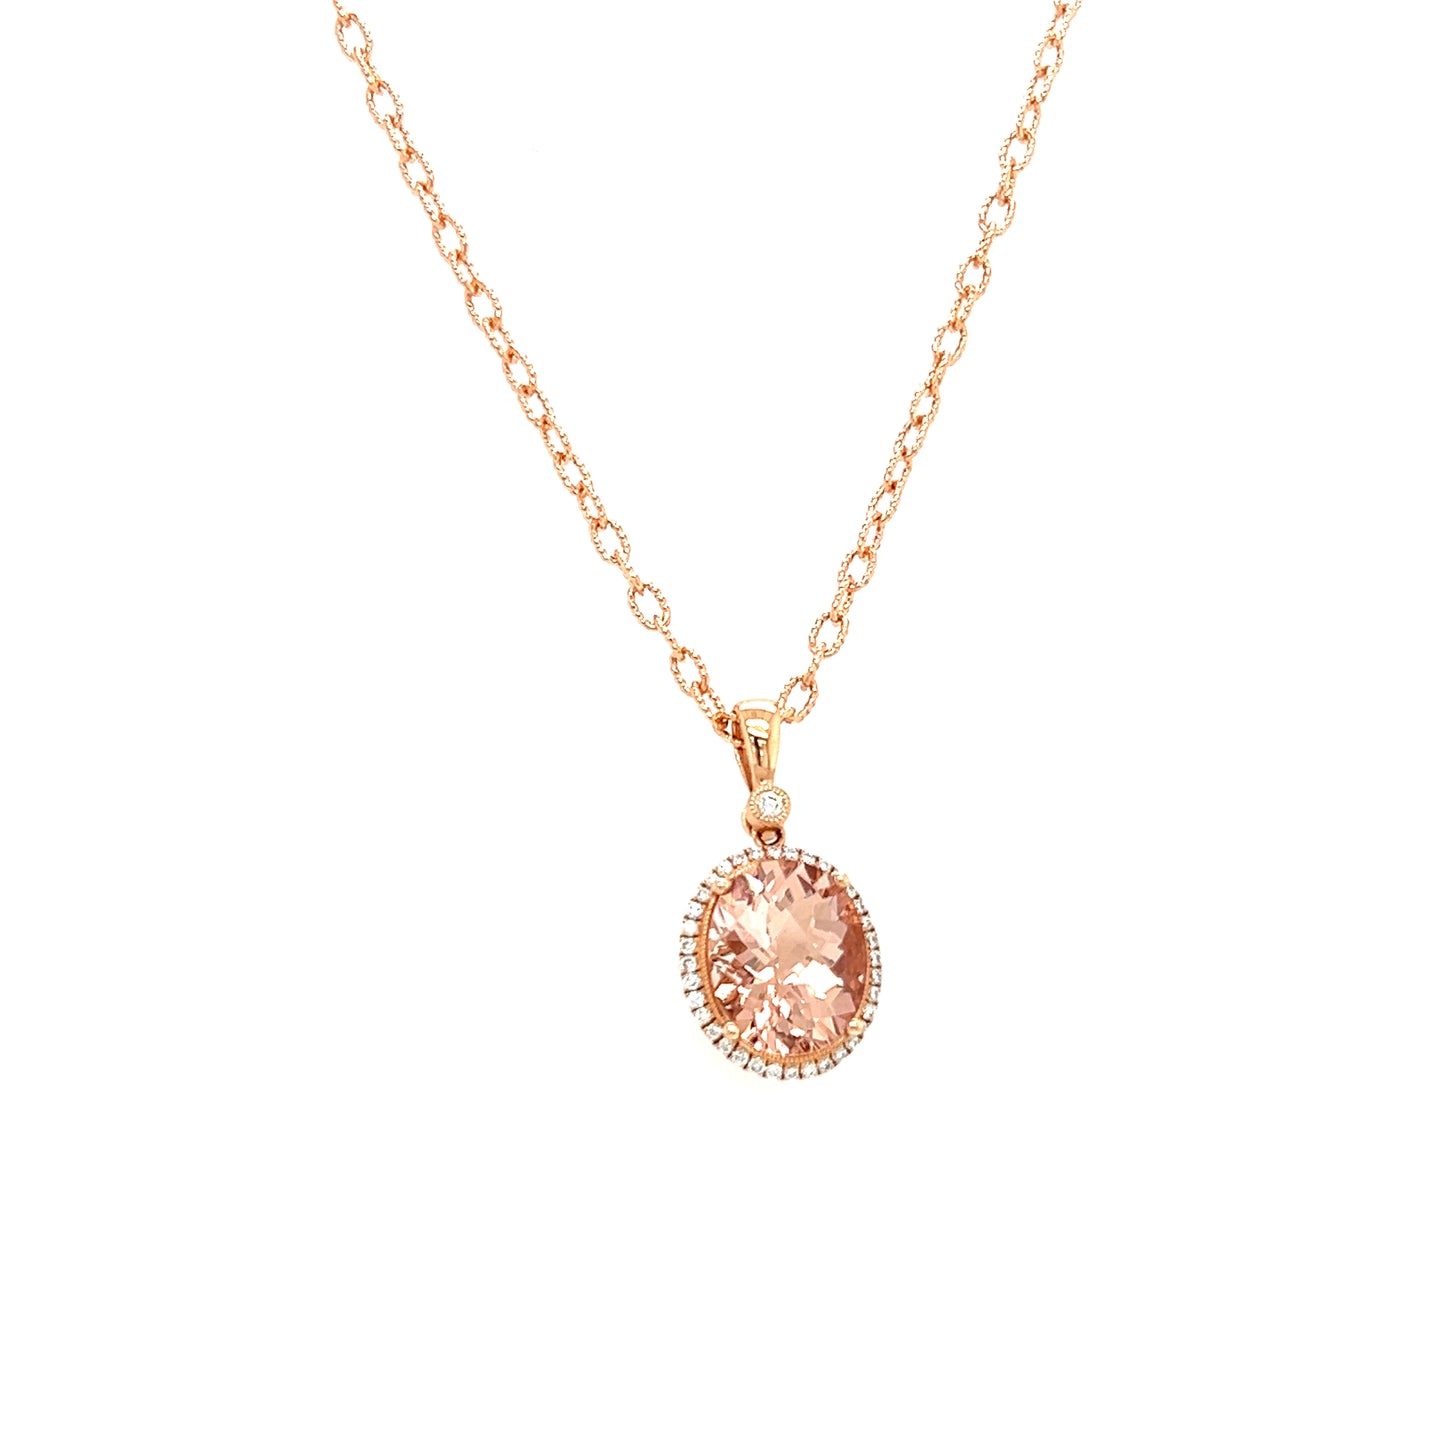 Oval Morganite Necklace with Diamond Halo in 14K Rose Gold